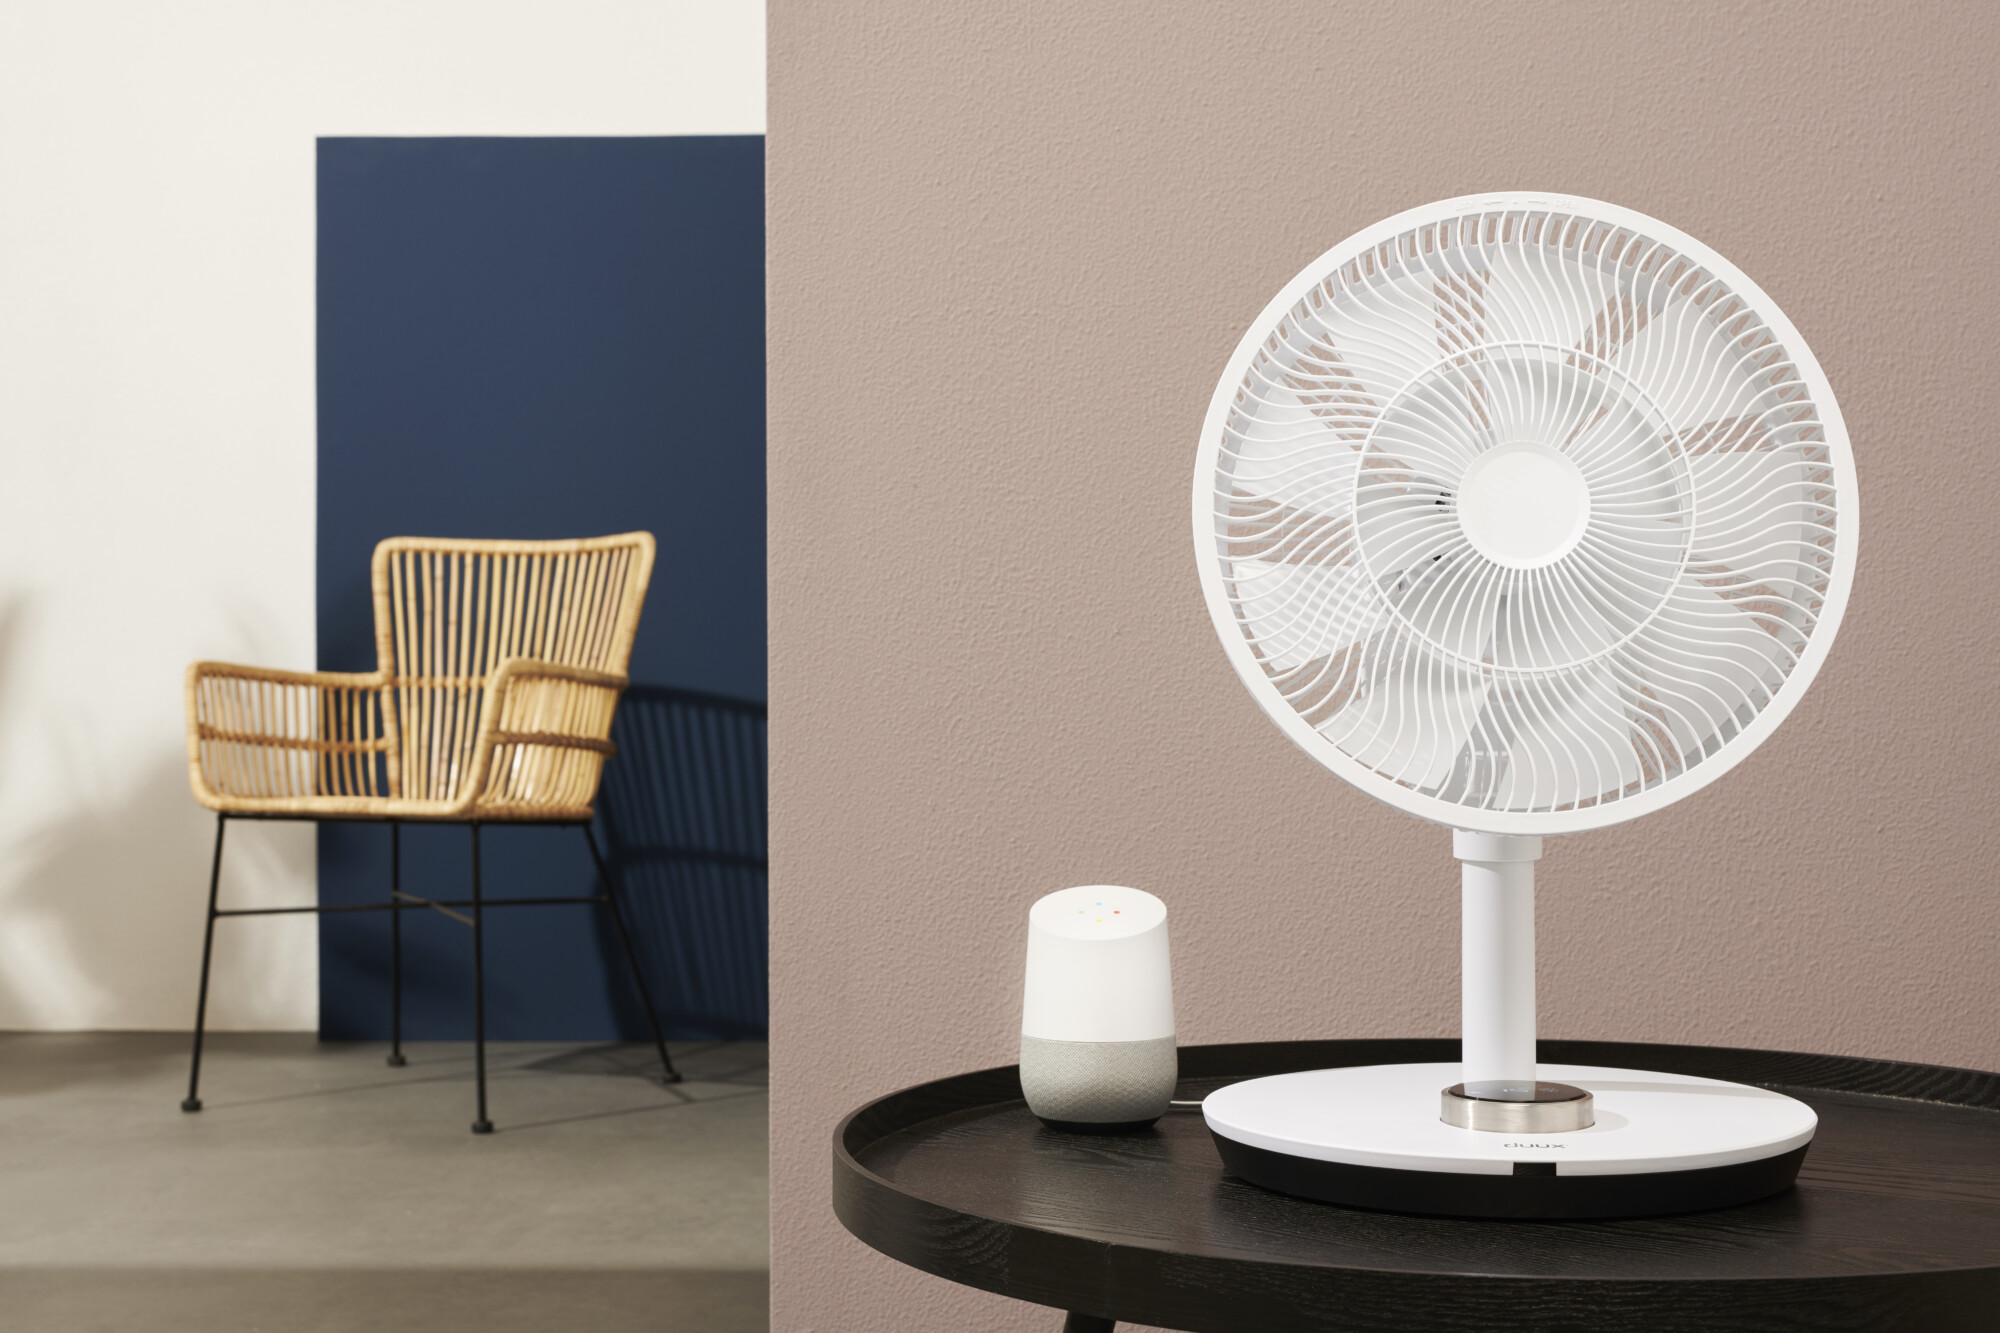 The Whisper Flex Smart Fan in White from Duux is the ultimate super quiet fan for your home office that circulates cool and fresh air.